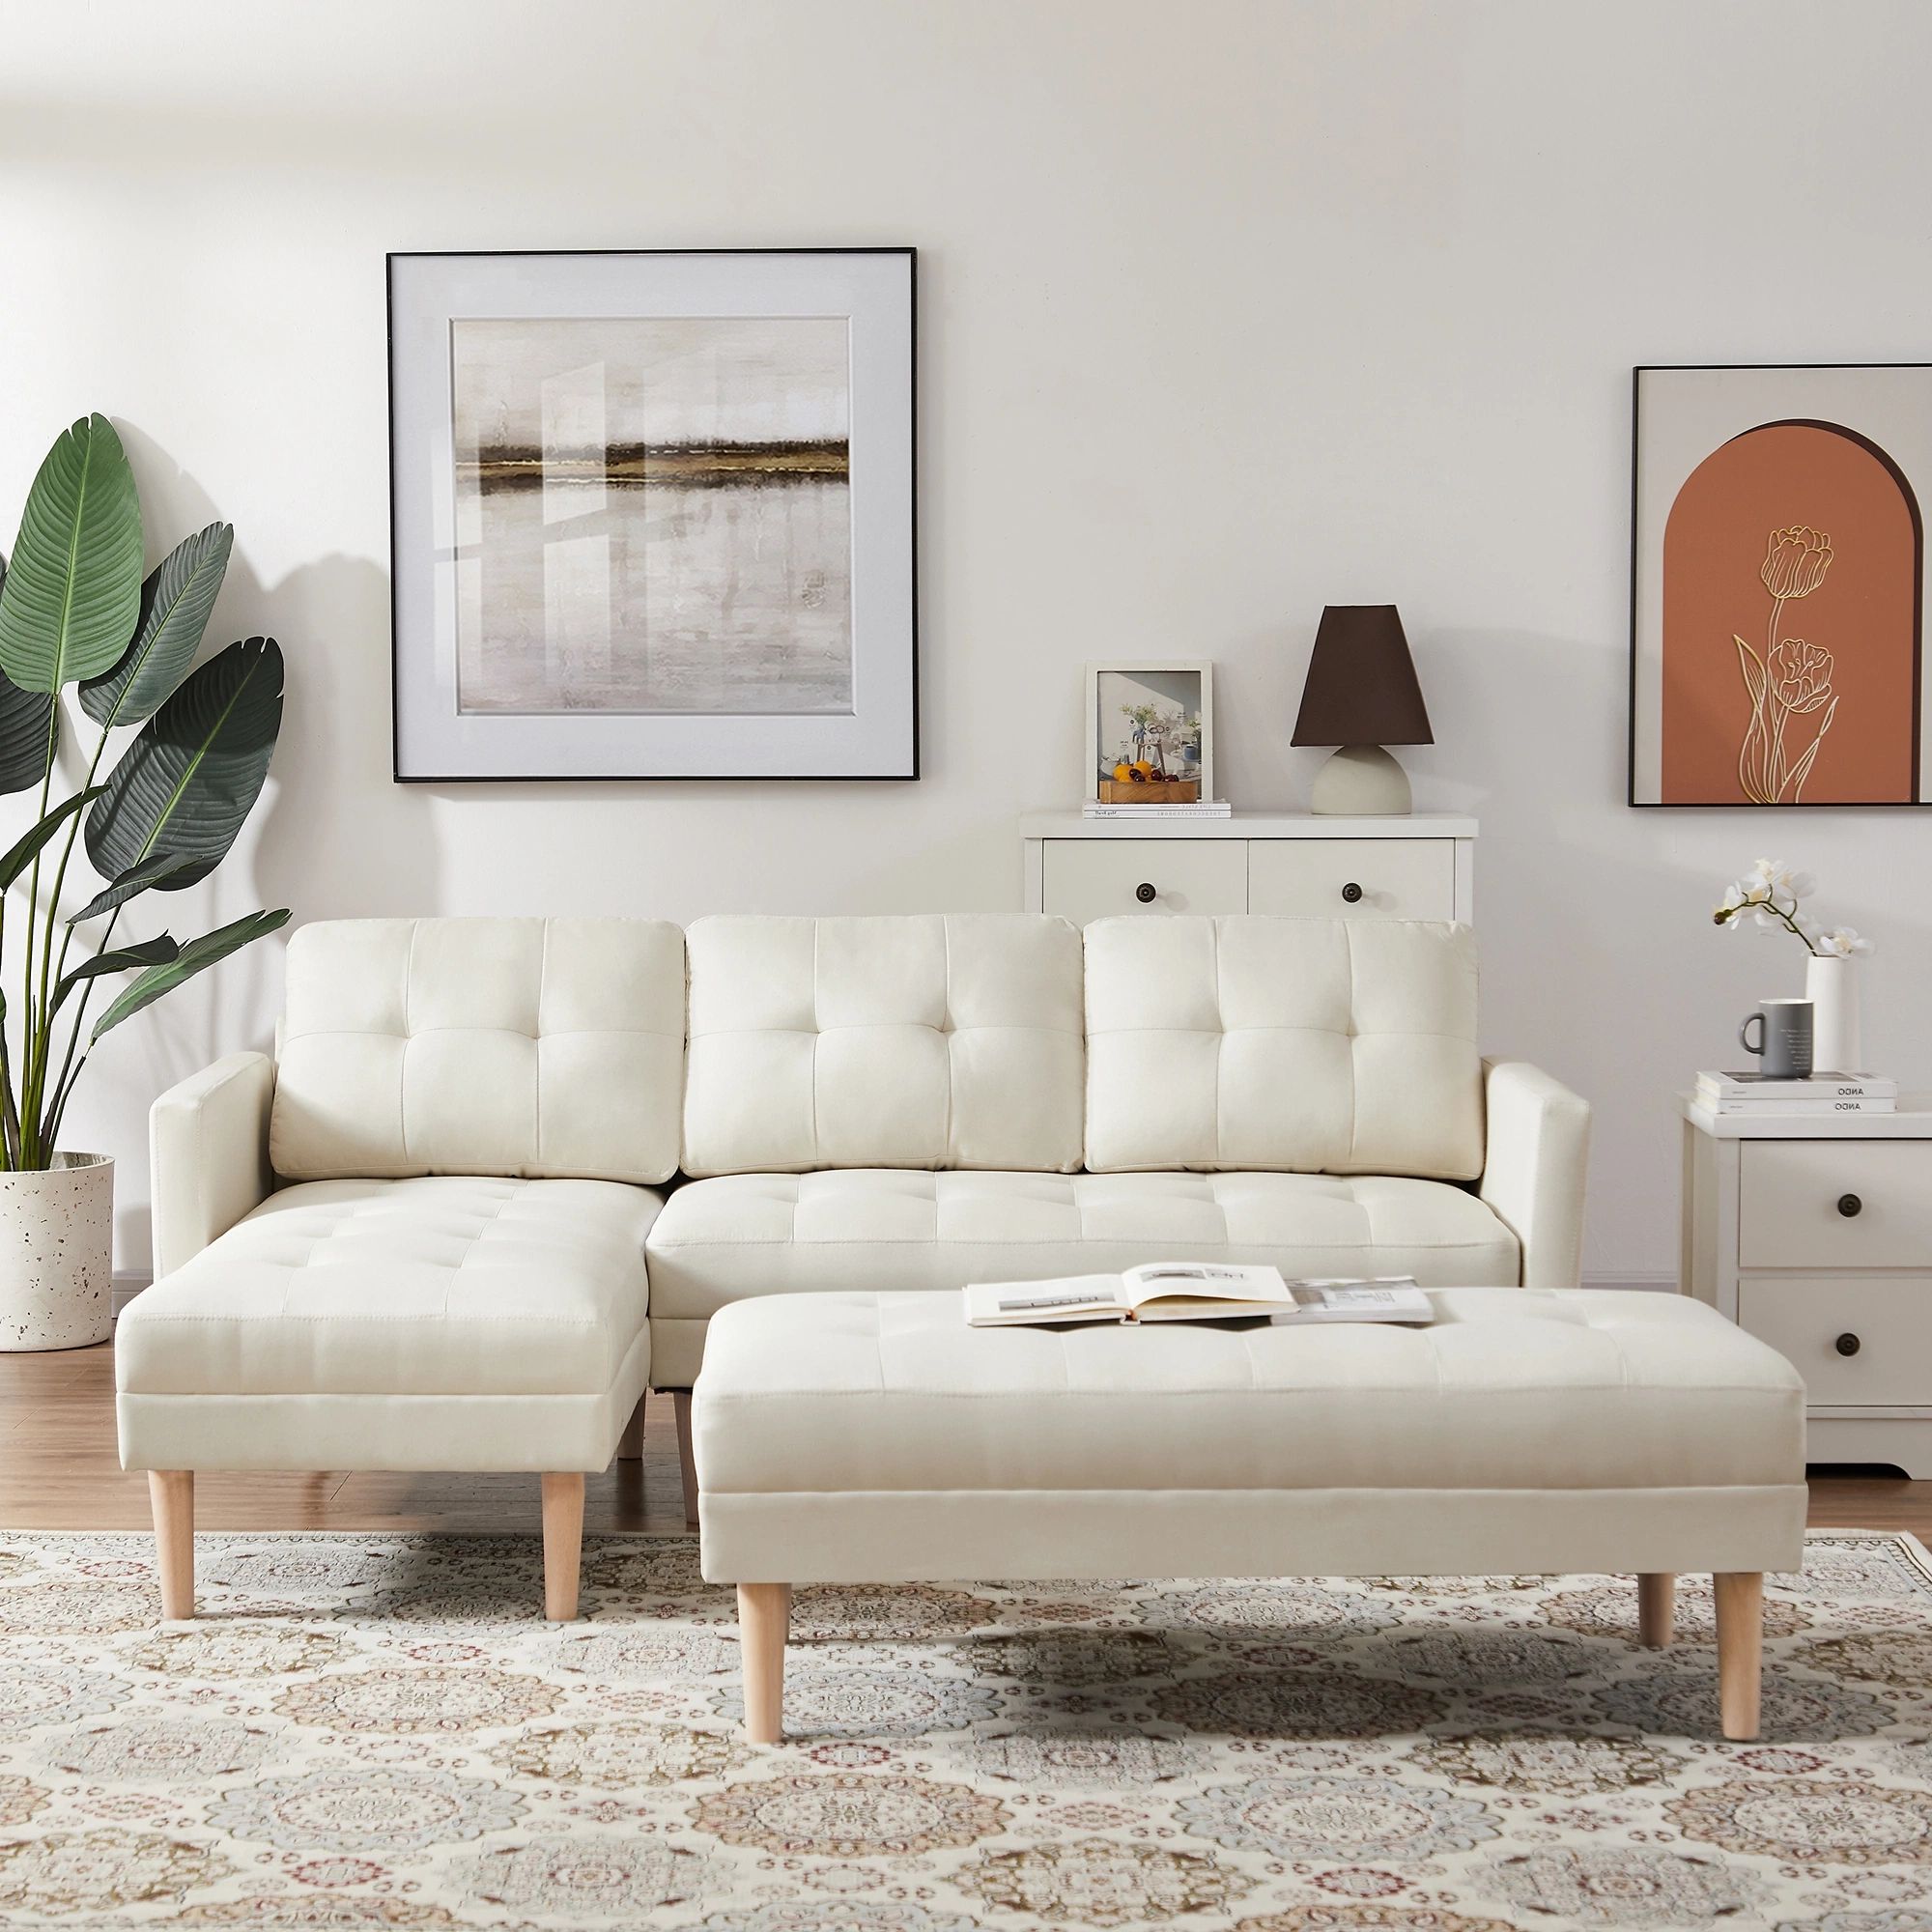 Dropship Beige Sectional Sofa Bed , L Shape Chaise Lounge With Ottoman  Bench To Sell Online At A Lower Price | Doba Throughout Beige L Shaped Sectional Sofas (Photo 13 of 15)